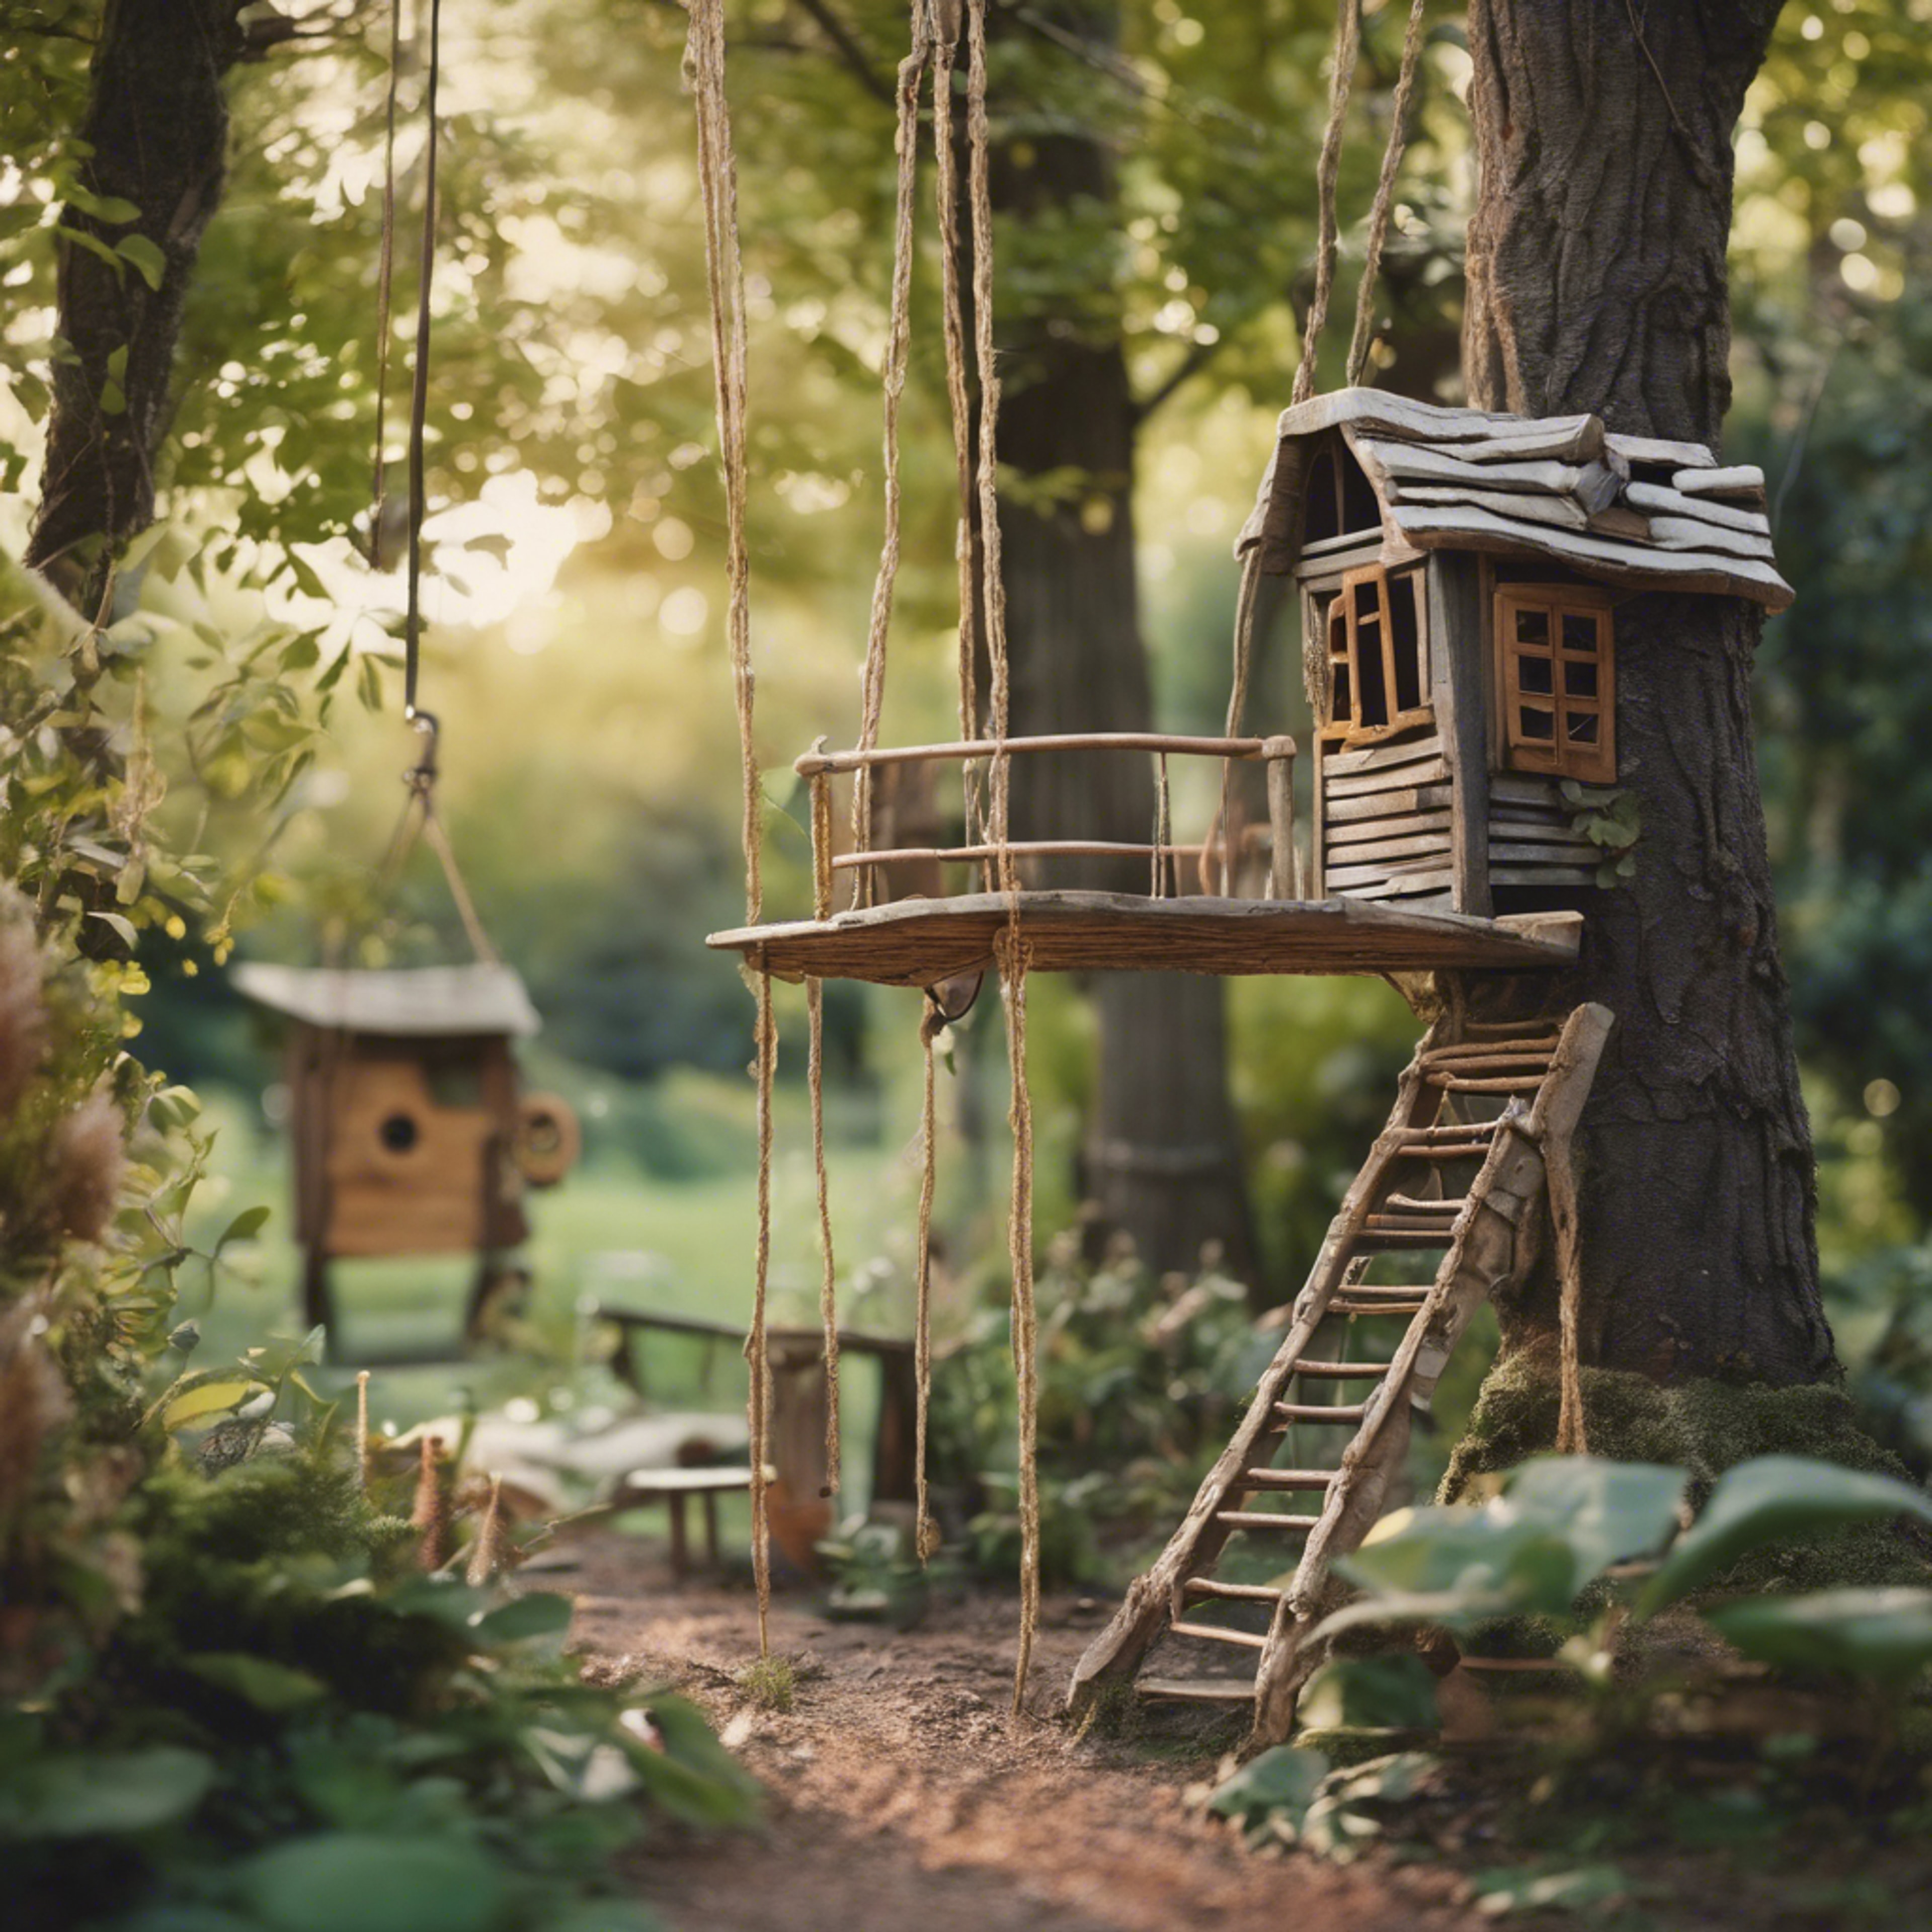 A nostalgic children’s garden filled with hidden treasures, tire swings, and treehouses built amidst towering trees. Шпалери[4077f42451f34ca69b37]